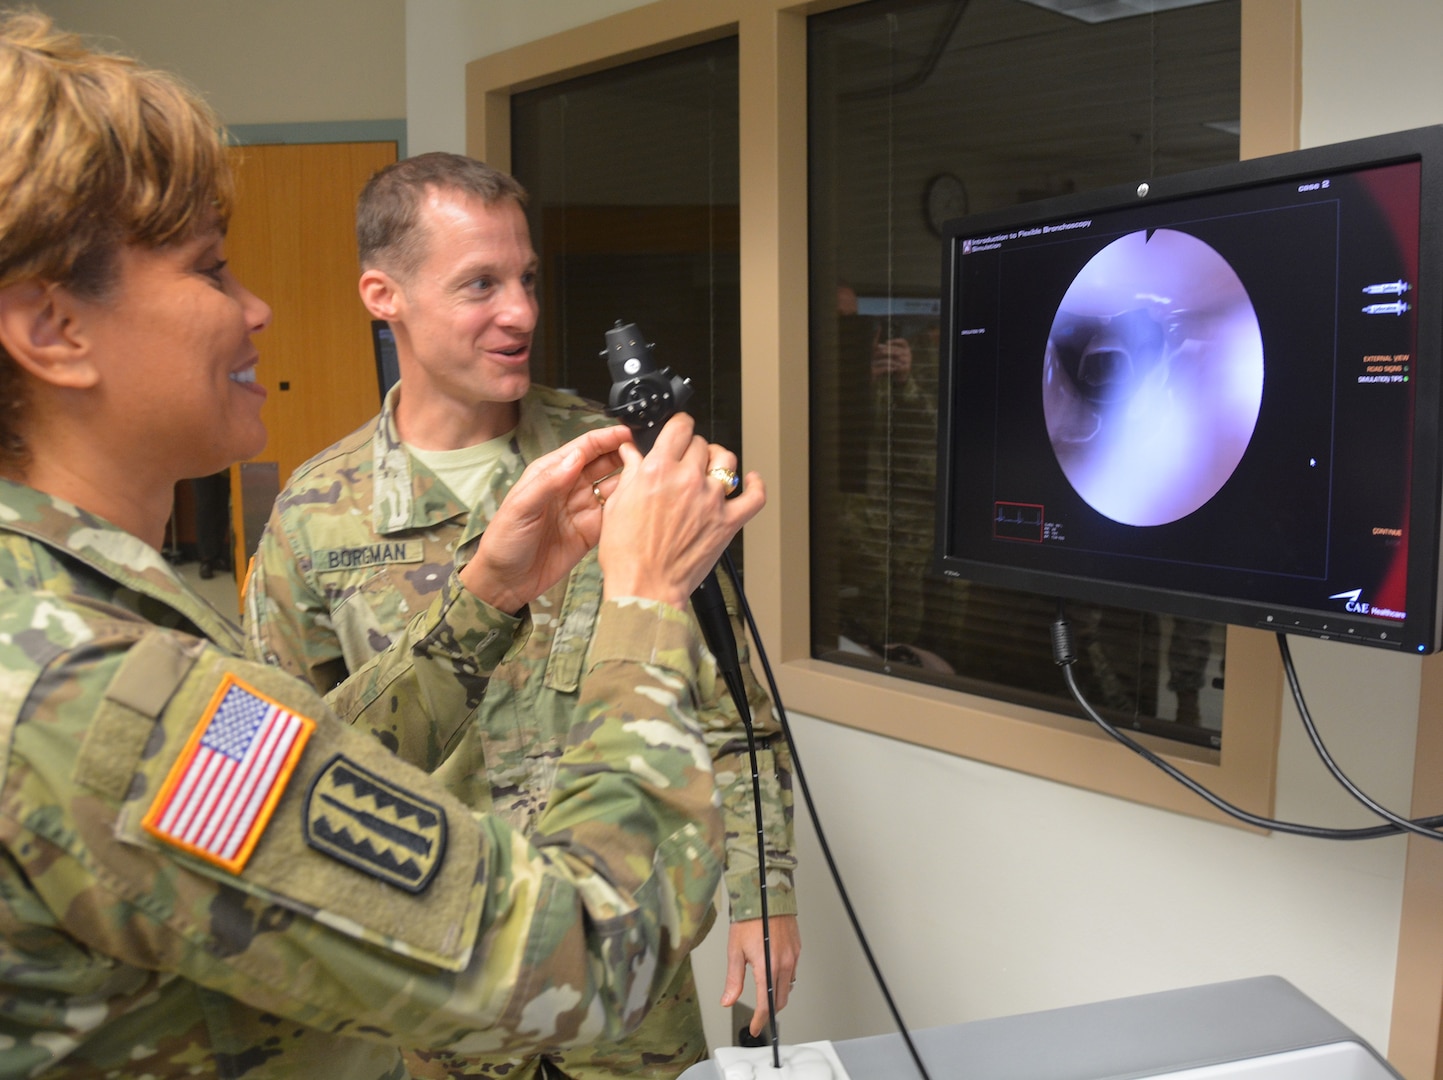 Lt. Gen. Nadja West (left), U.S. Army Surgeon General, experiments with the bronchoscope simulator with the assistance of Lt. Col. Matthew Borgman during her visit to Brooke Army Medical Center at Joint Base San Antonio-Fort Sam Houston Dec. 14. This was West’s first visit since she became surgeon general. She toured several areas within the hospital including the simulation center, burn center, emergency department, rooftop helipad, and then went to the Center for the Intrepid. 